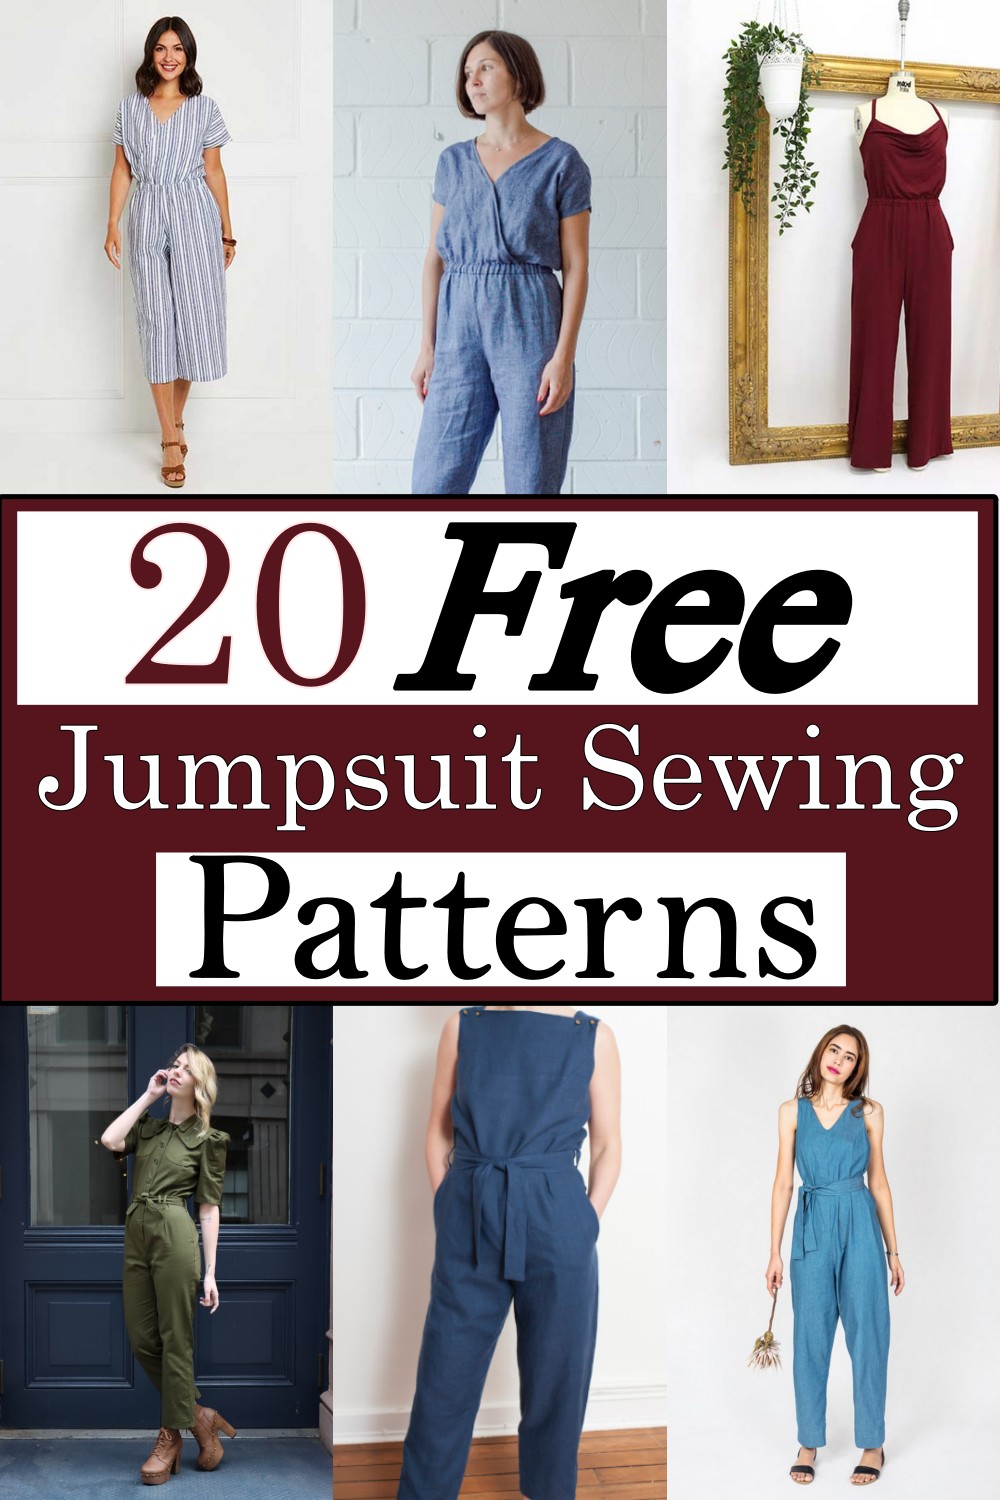 Free Jumpsuit Sewing Patterns